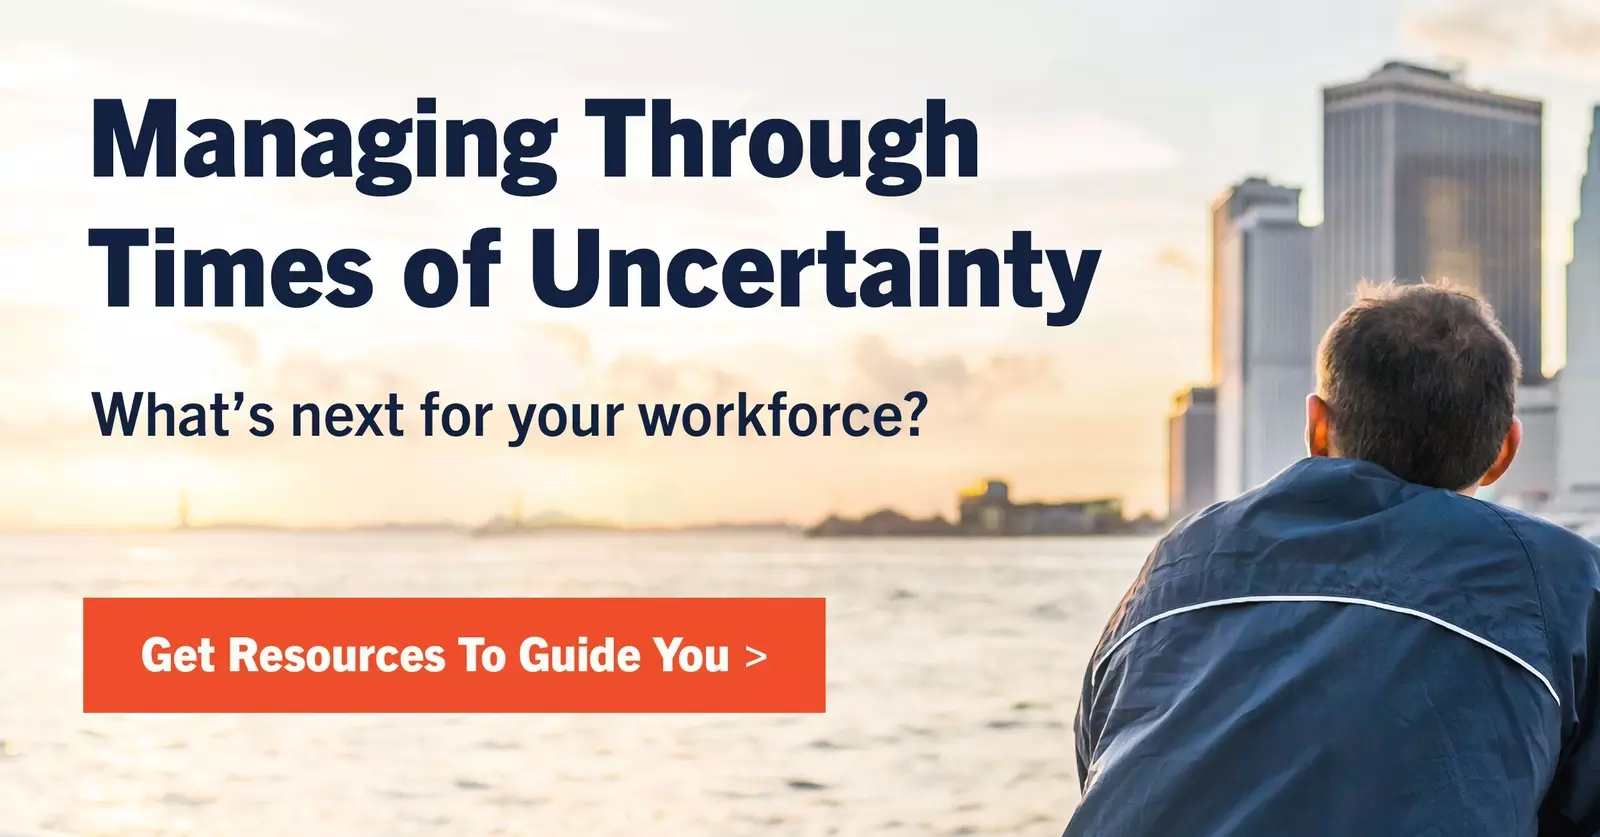 Managing through times of uncertainty